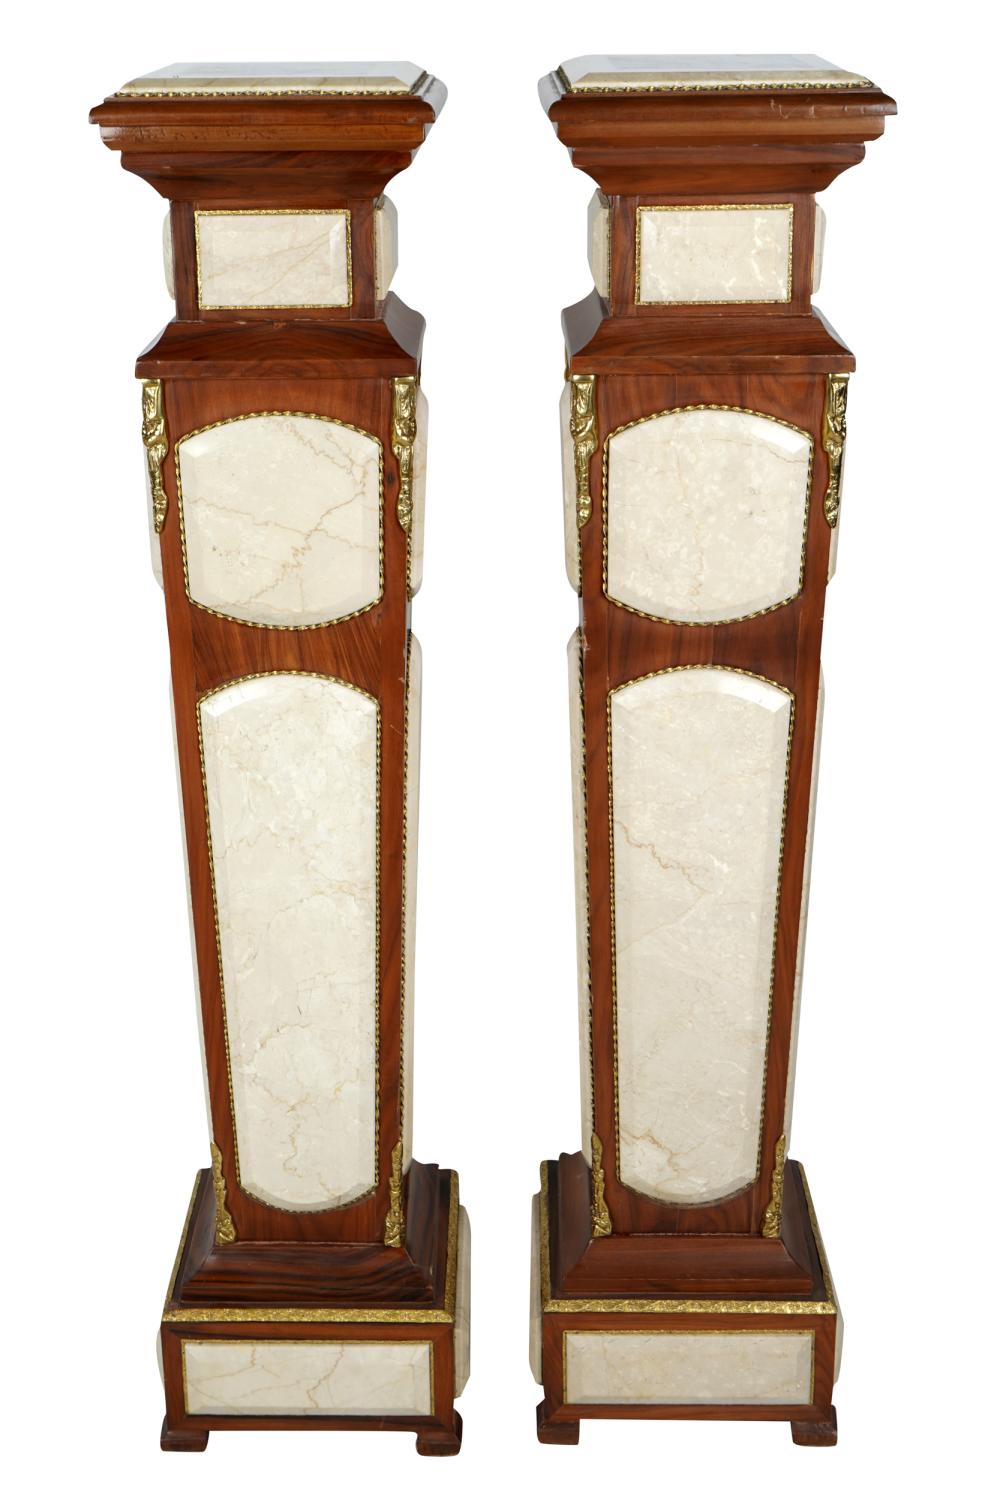 PAIR OF MAHOGANY PEDESTALSwith 332bcc